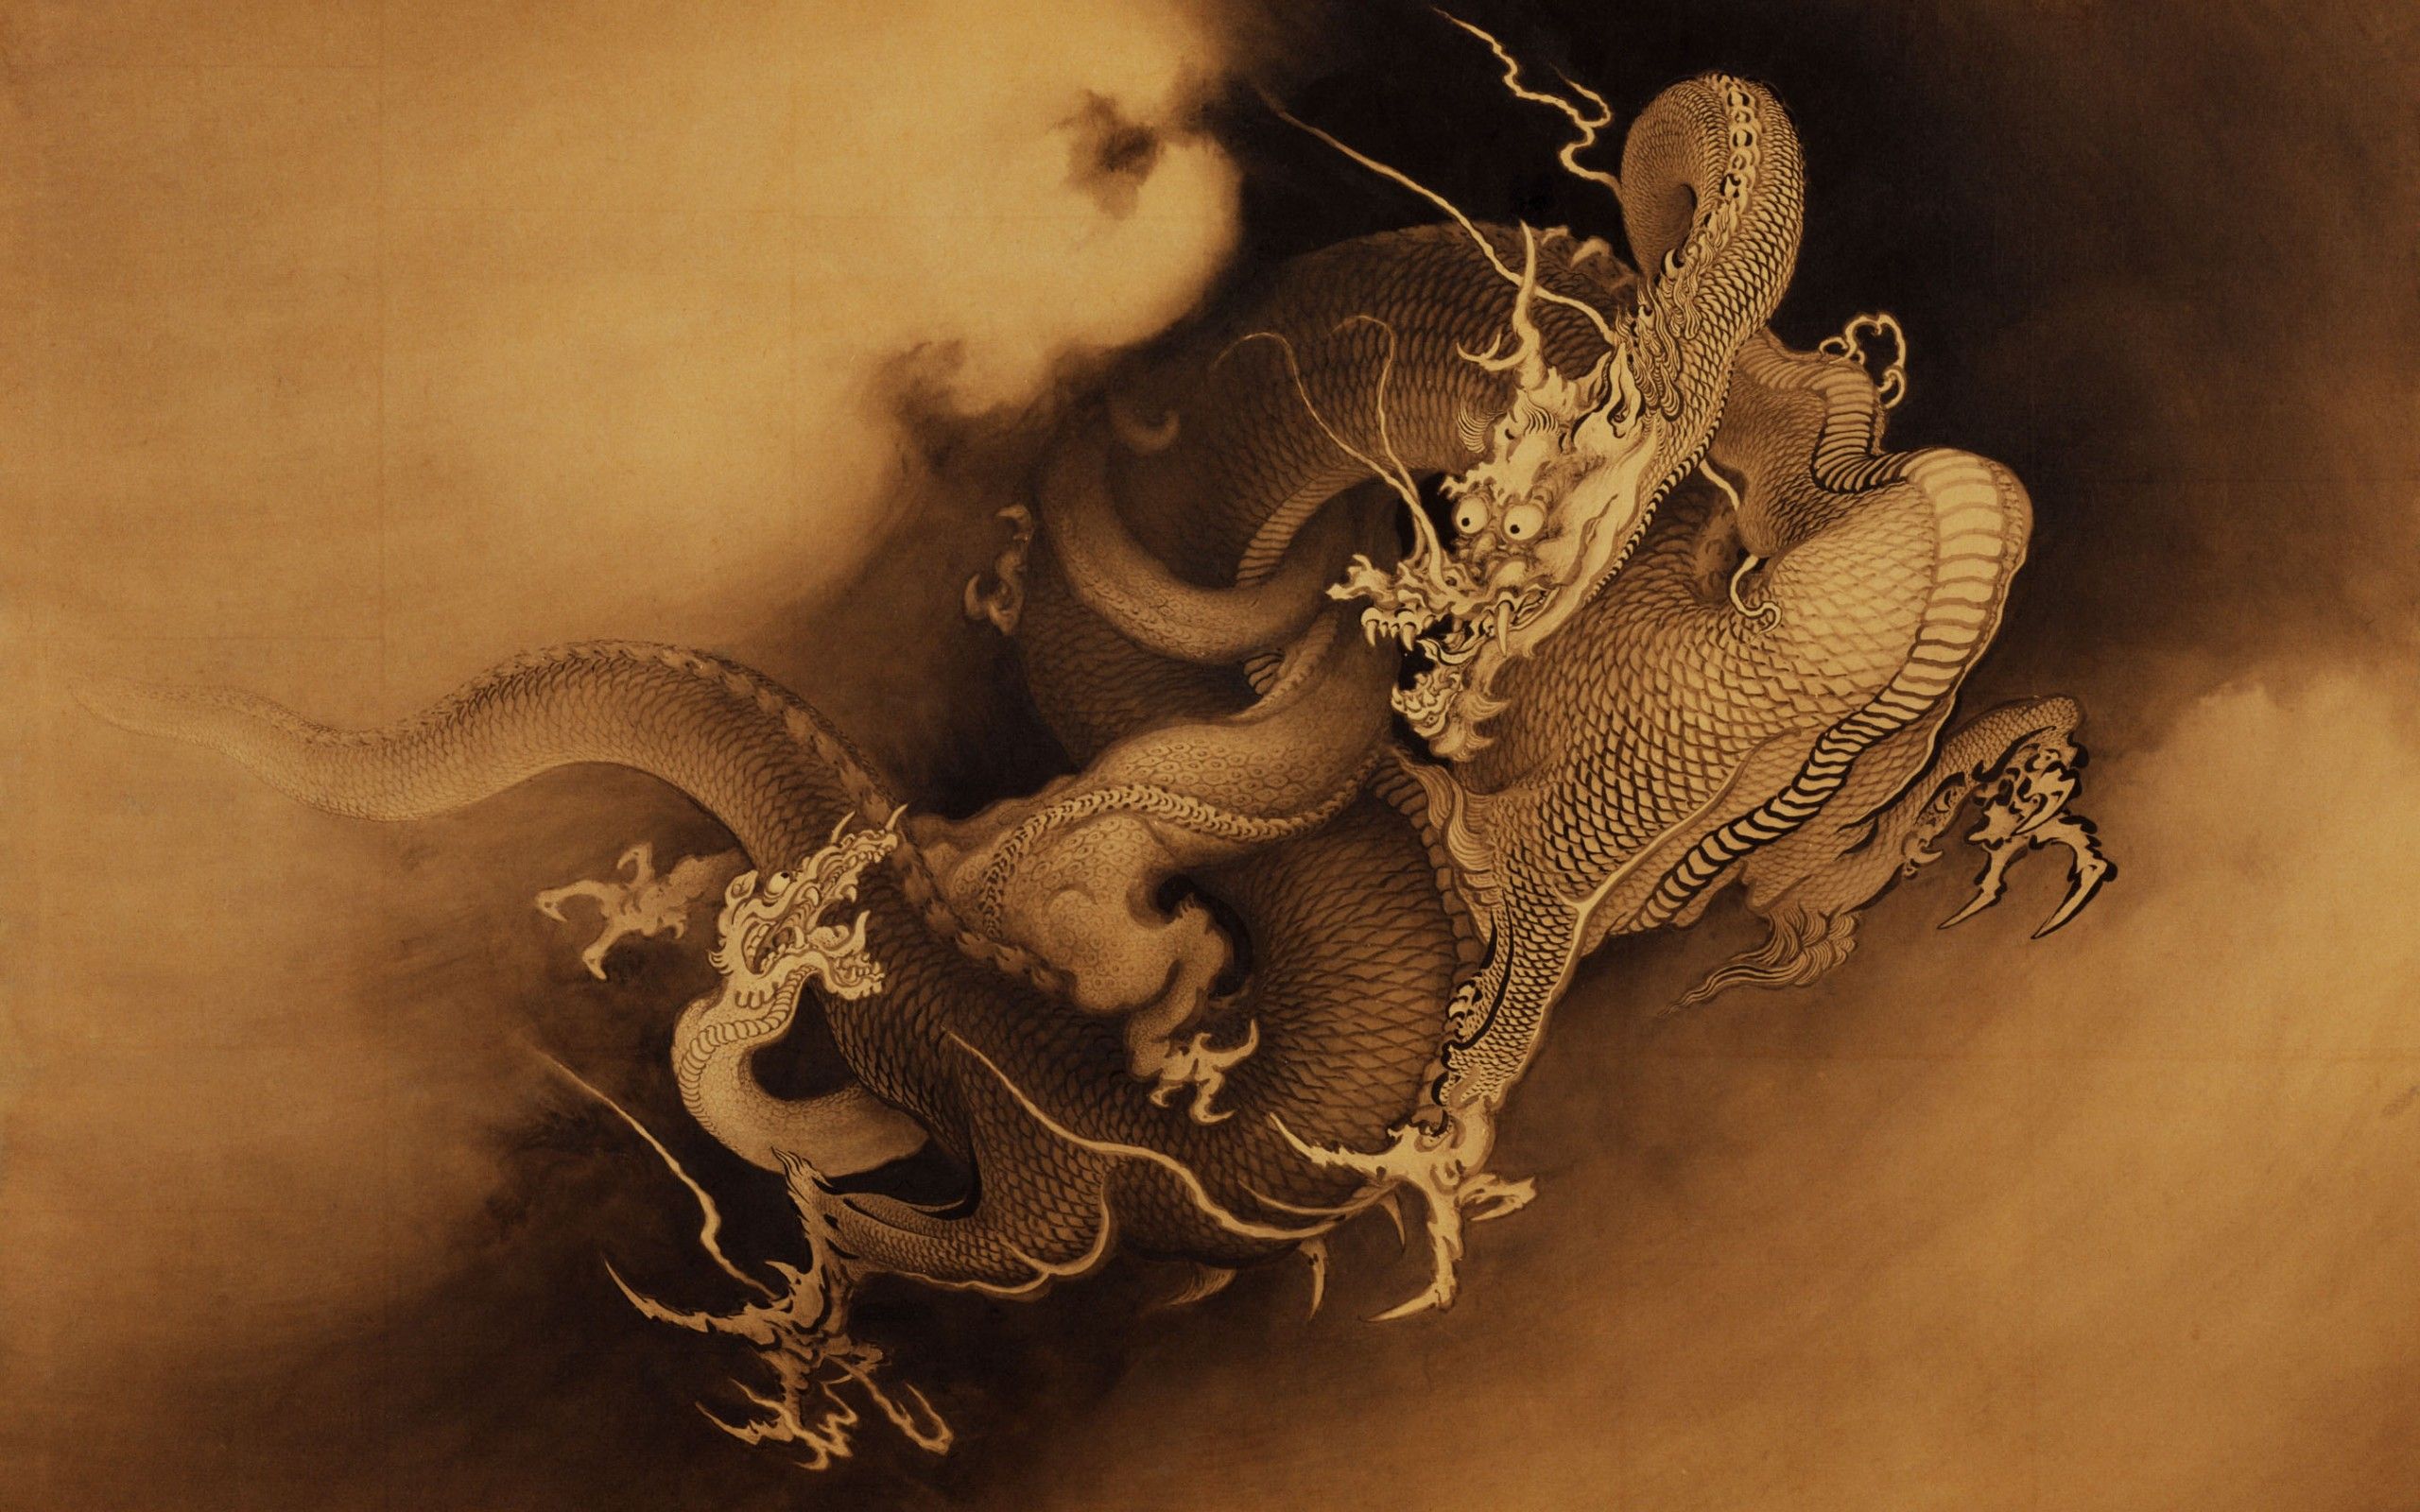 15 Chinese Dragon HD Wallpapers Backgrounds - Wallpaper Abyss